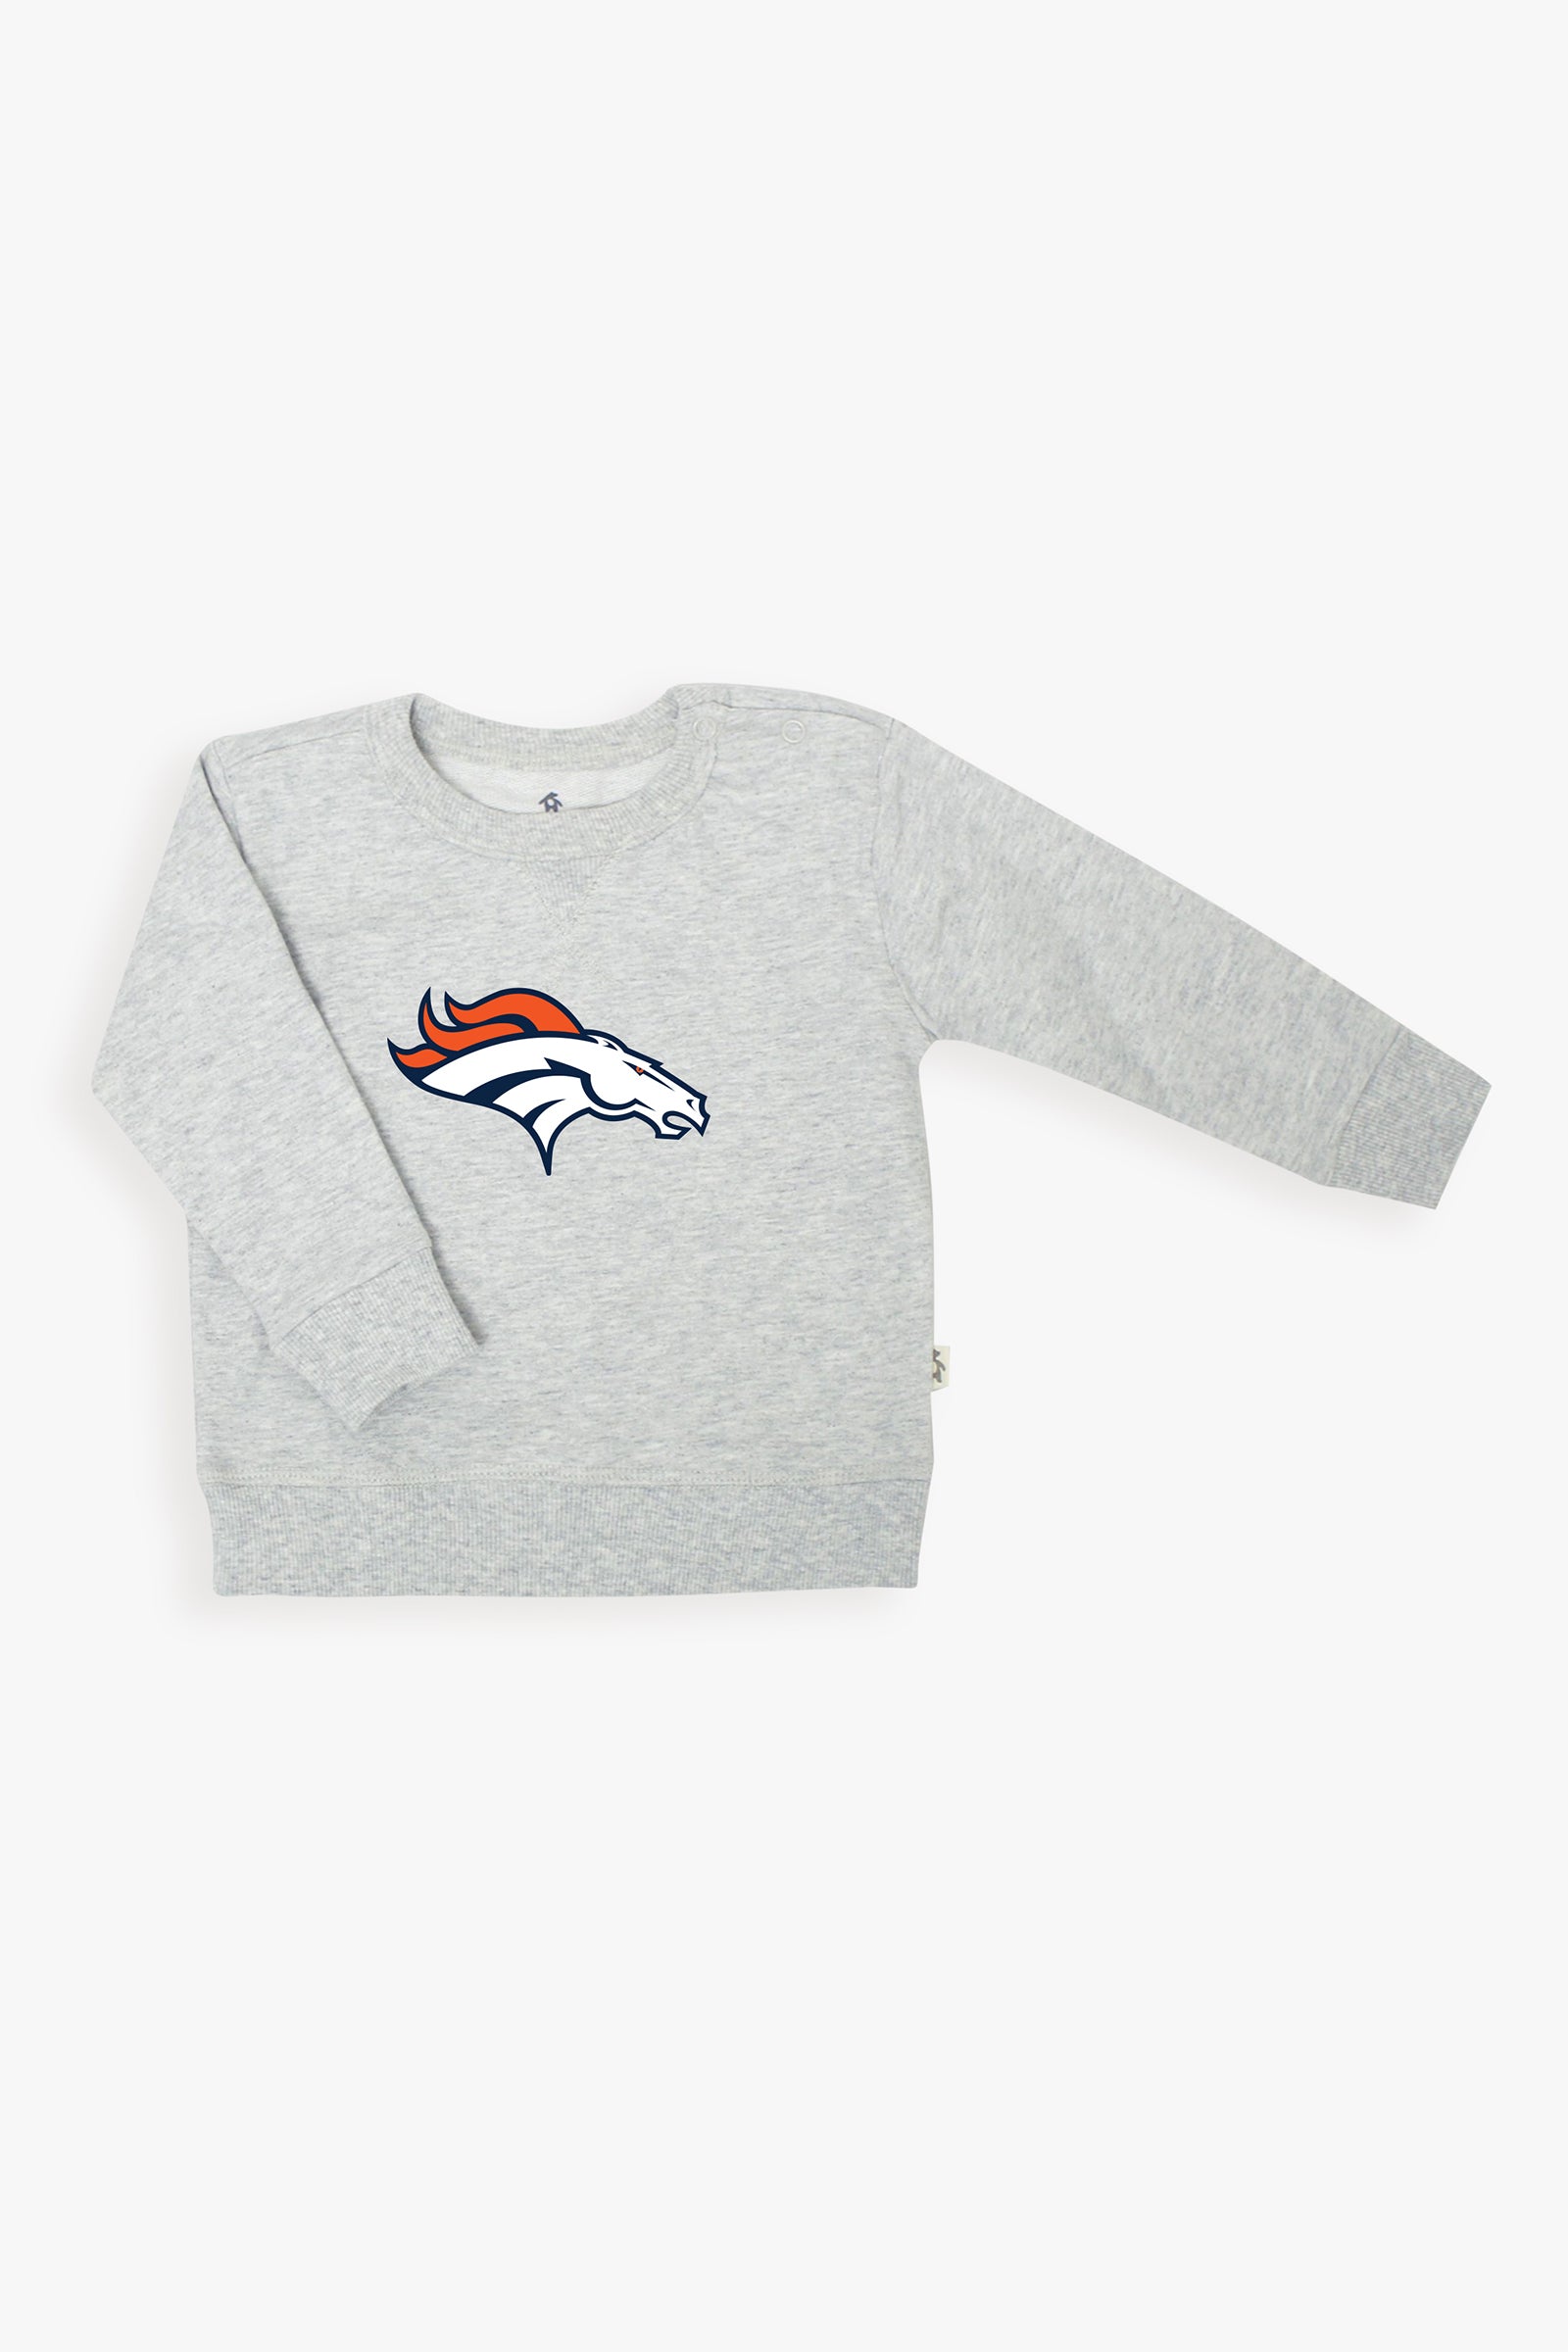 Gertex NFL Baby French Terry Crewneck Sweater in Grey